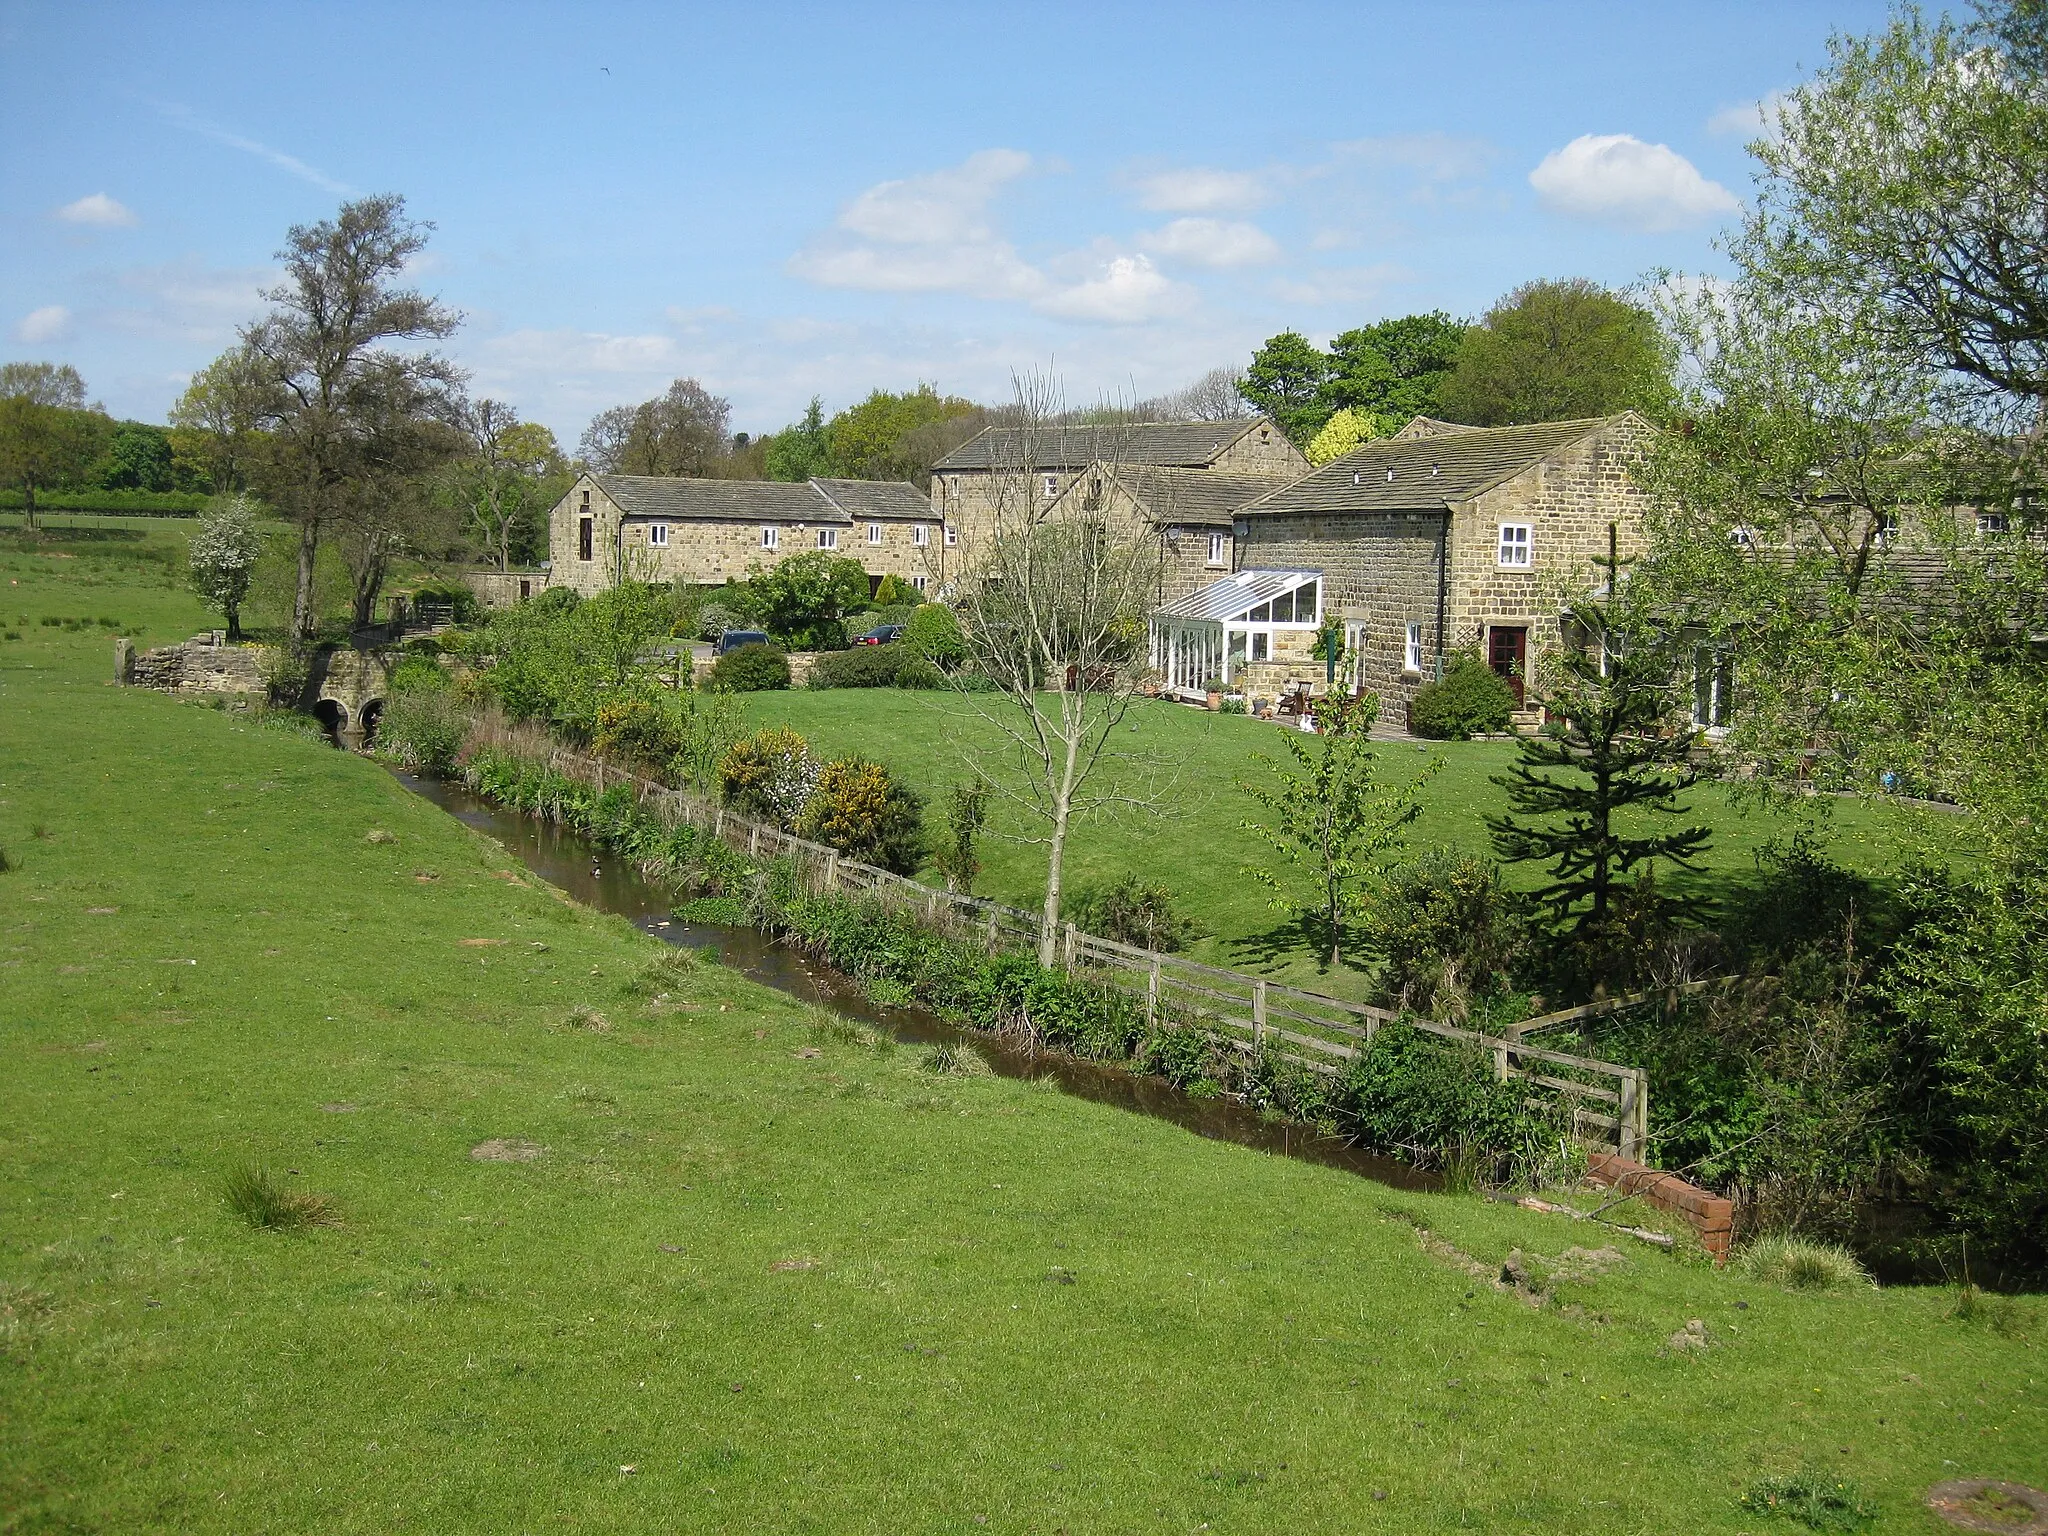 Photo showing: Adel Beck (stream) and buildings of the former Adel Mill Farm and millworkers cottages (now residences). A bridge over the stream .